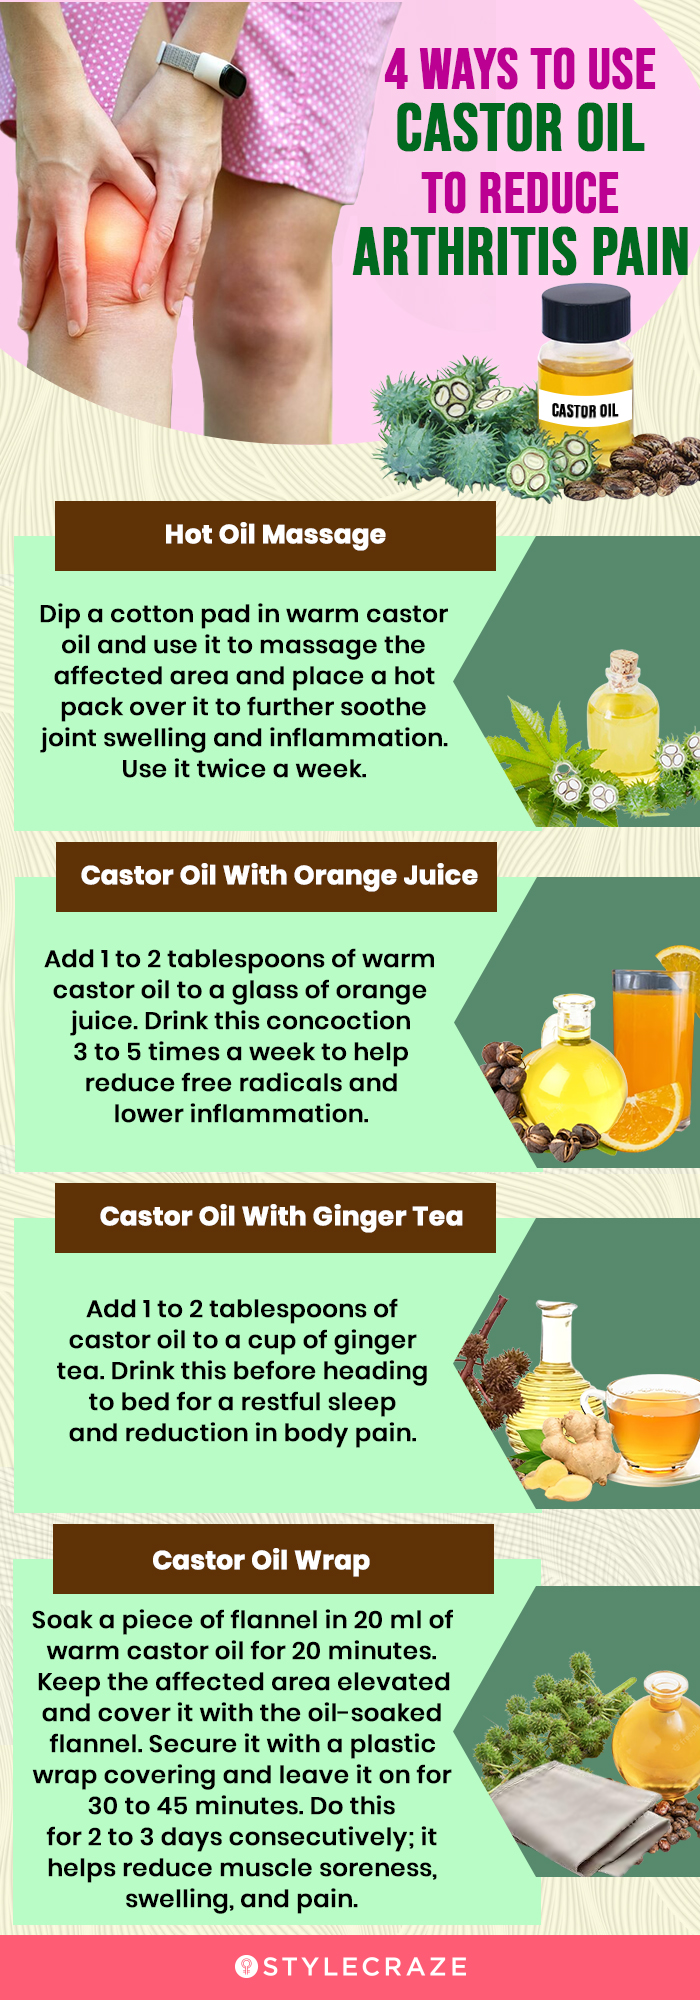 4 ways to use castor oil to reduce arthritis pain (infographic)